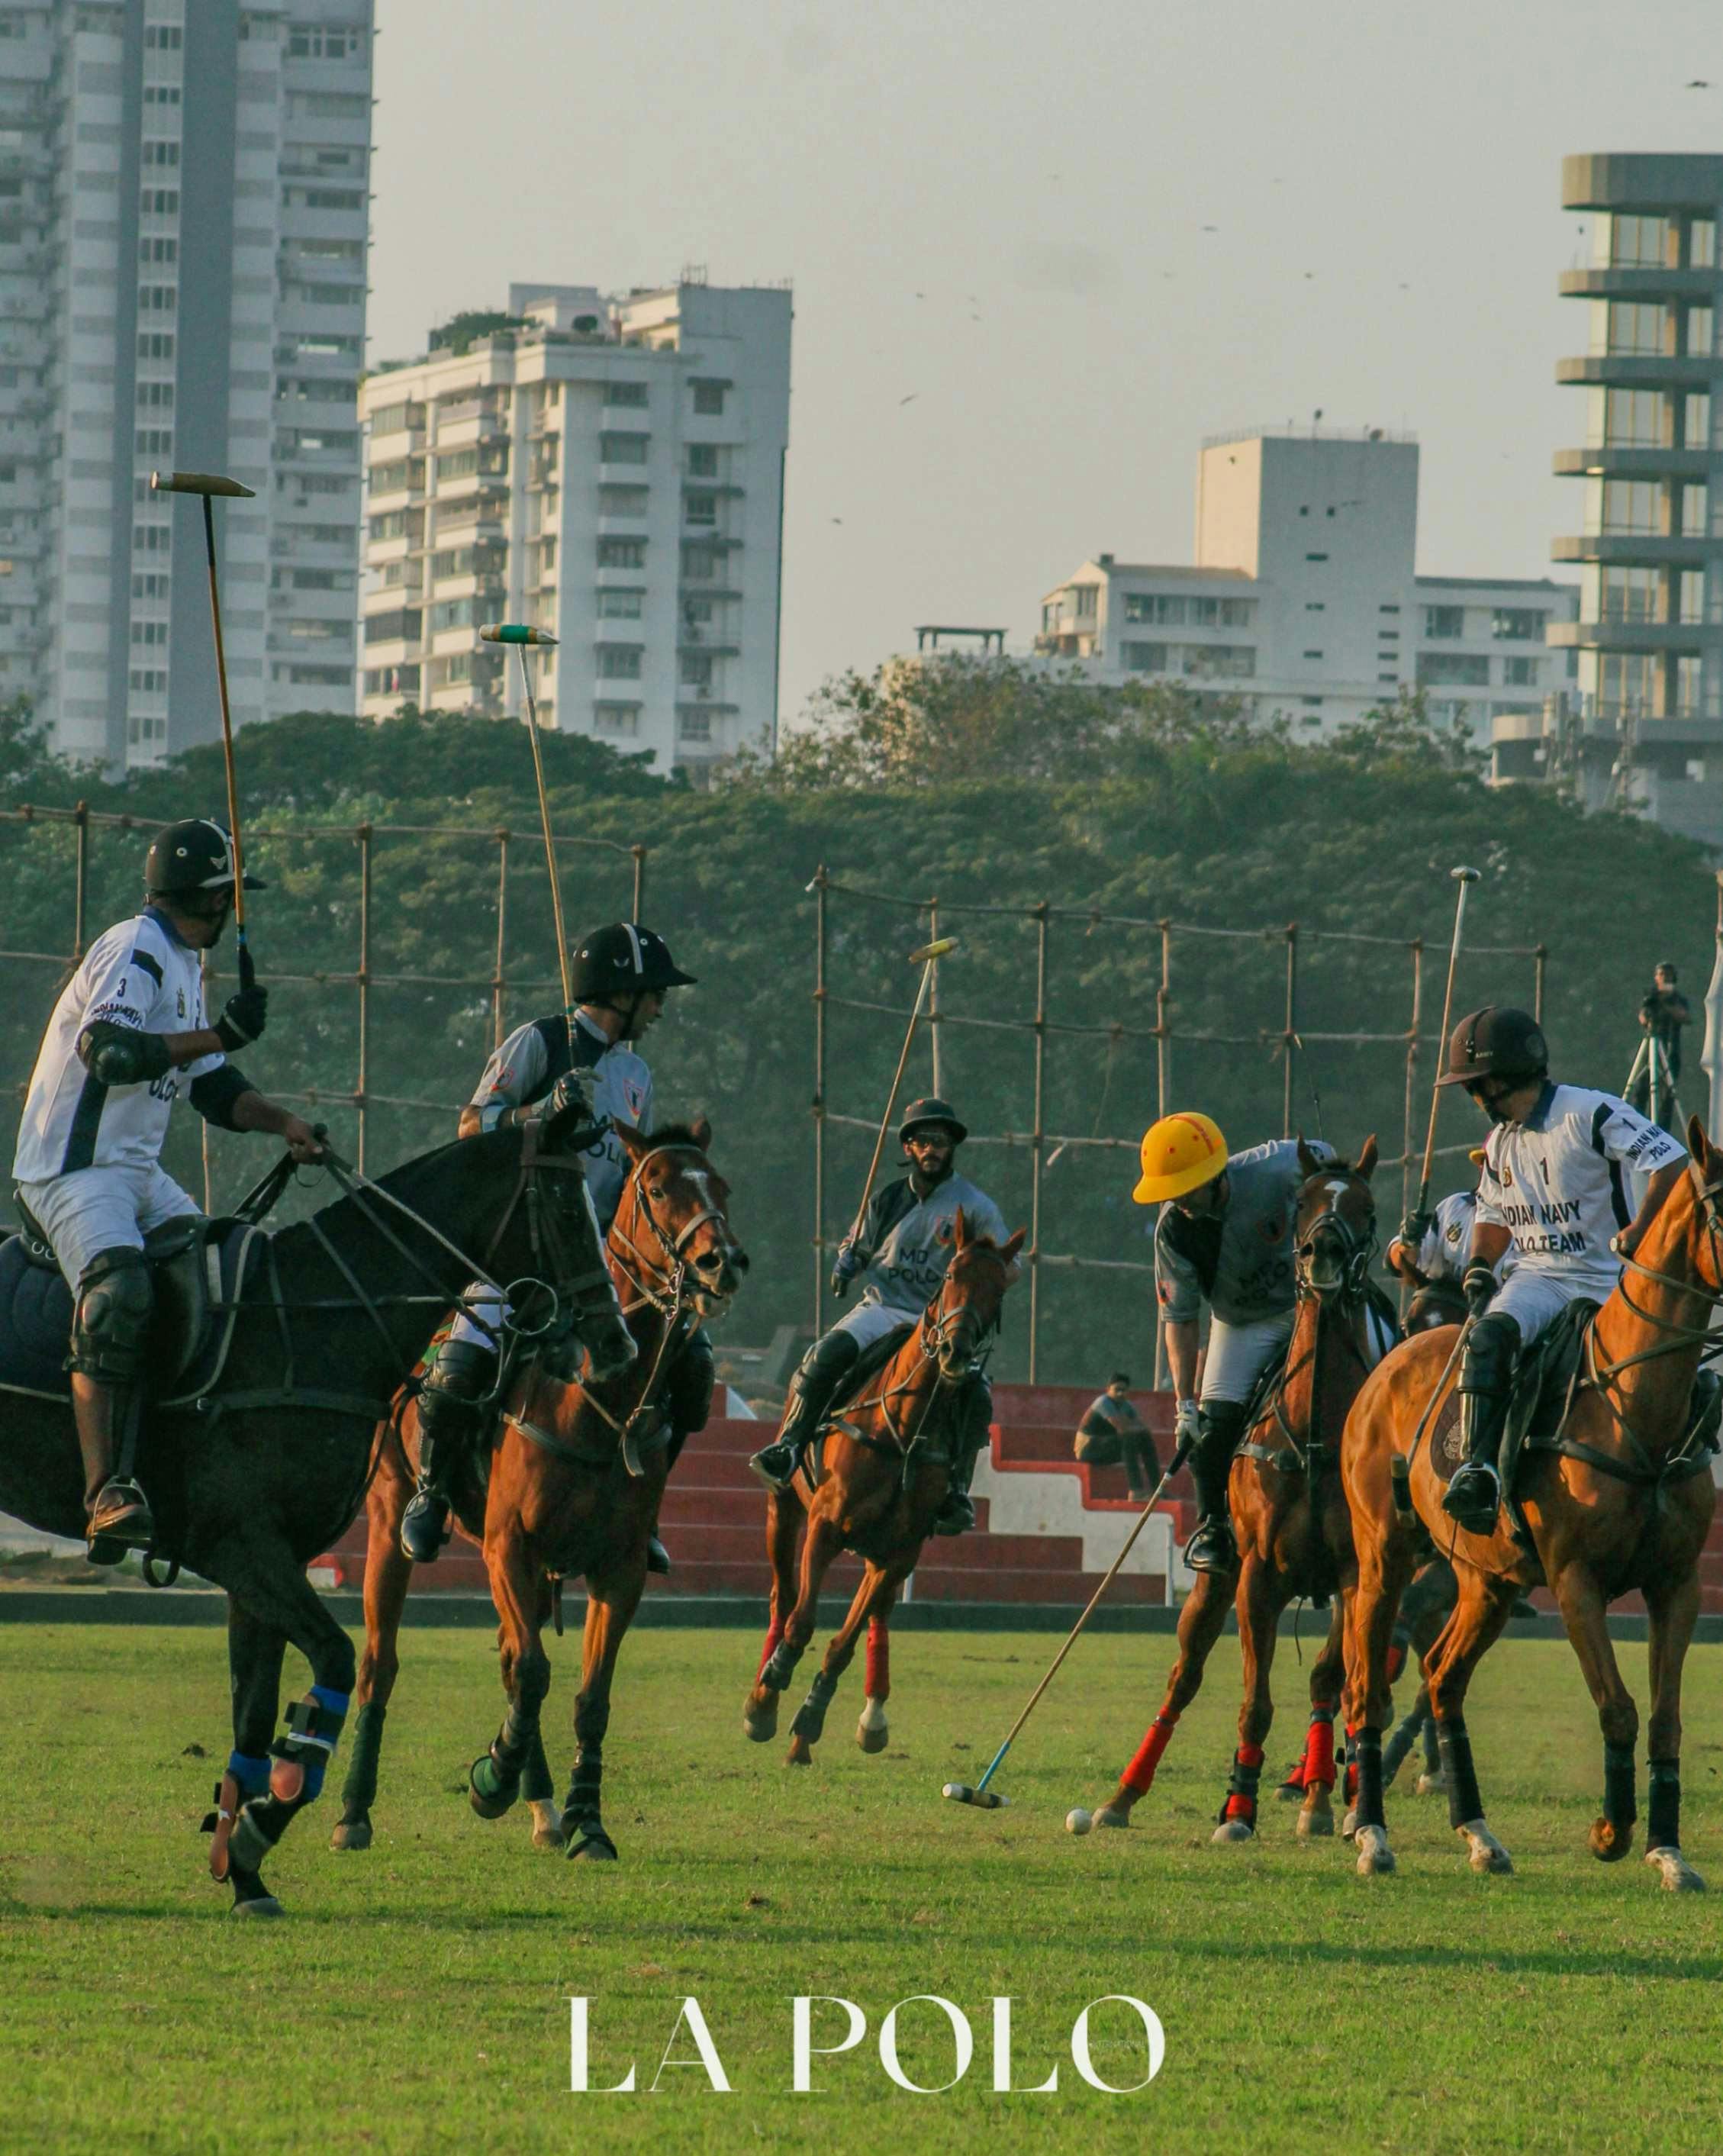 The competitiveness of polo is what draws players and spectators to the sport.